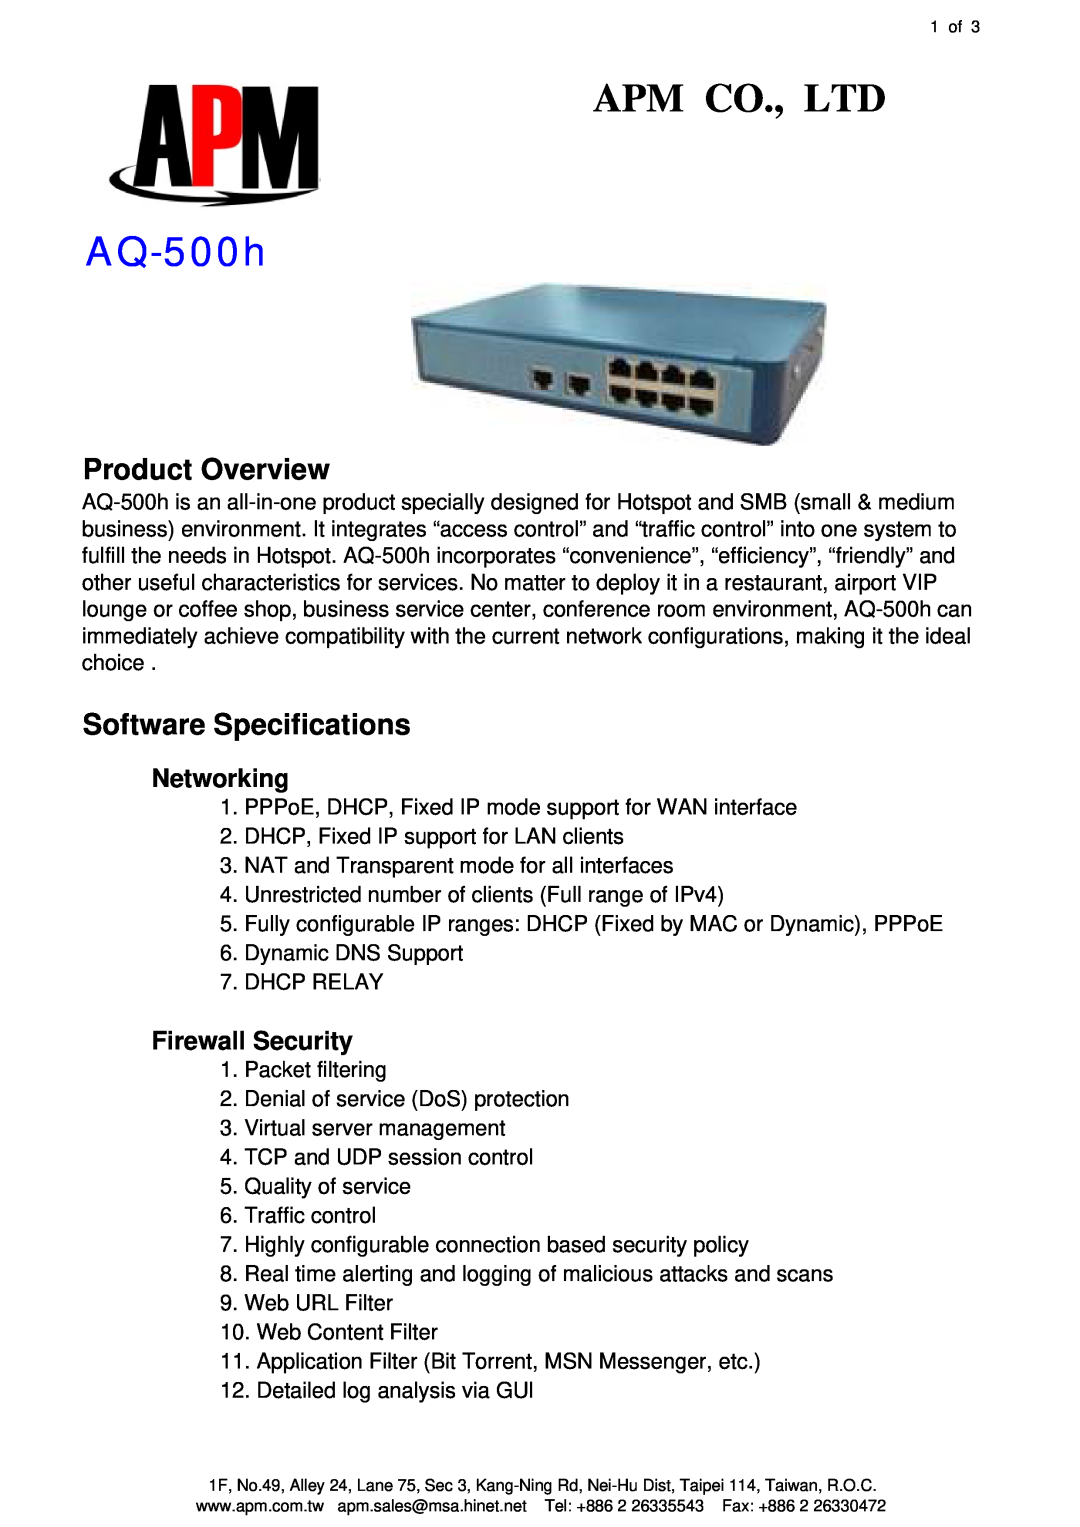 APM AQ-500h specifications Product Overview, Software Specifications, Networking, Firewall Security 